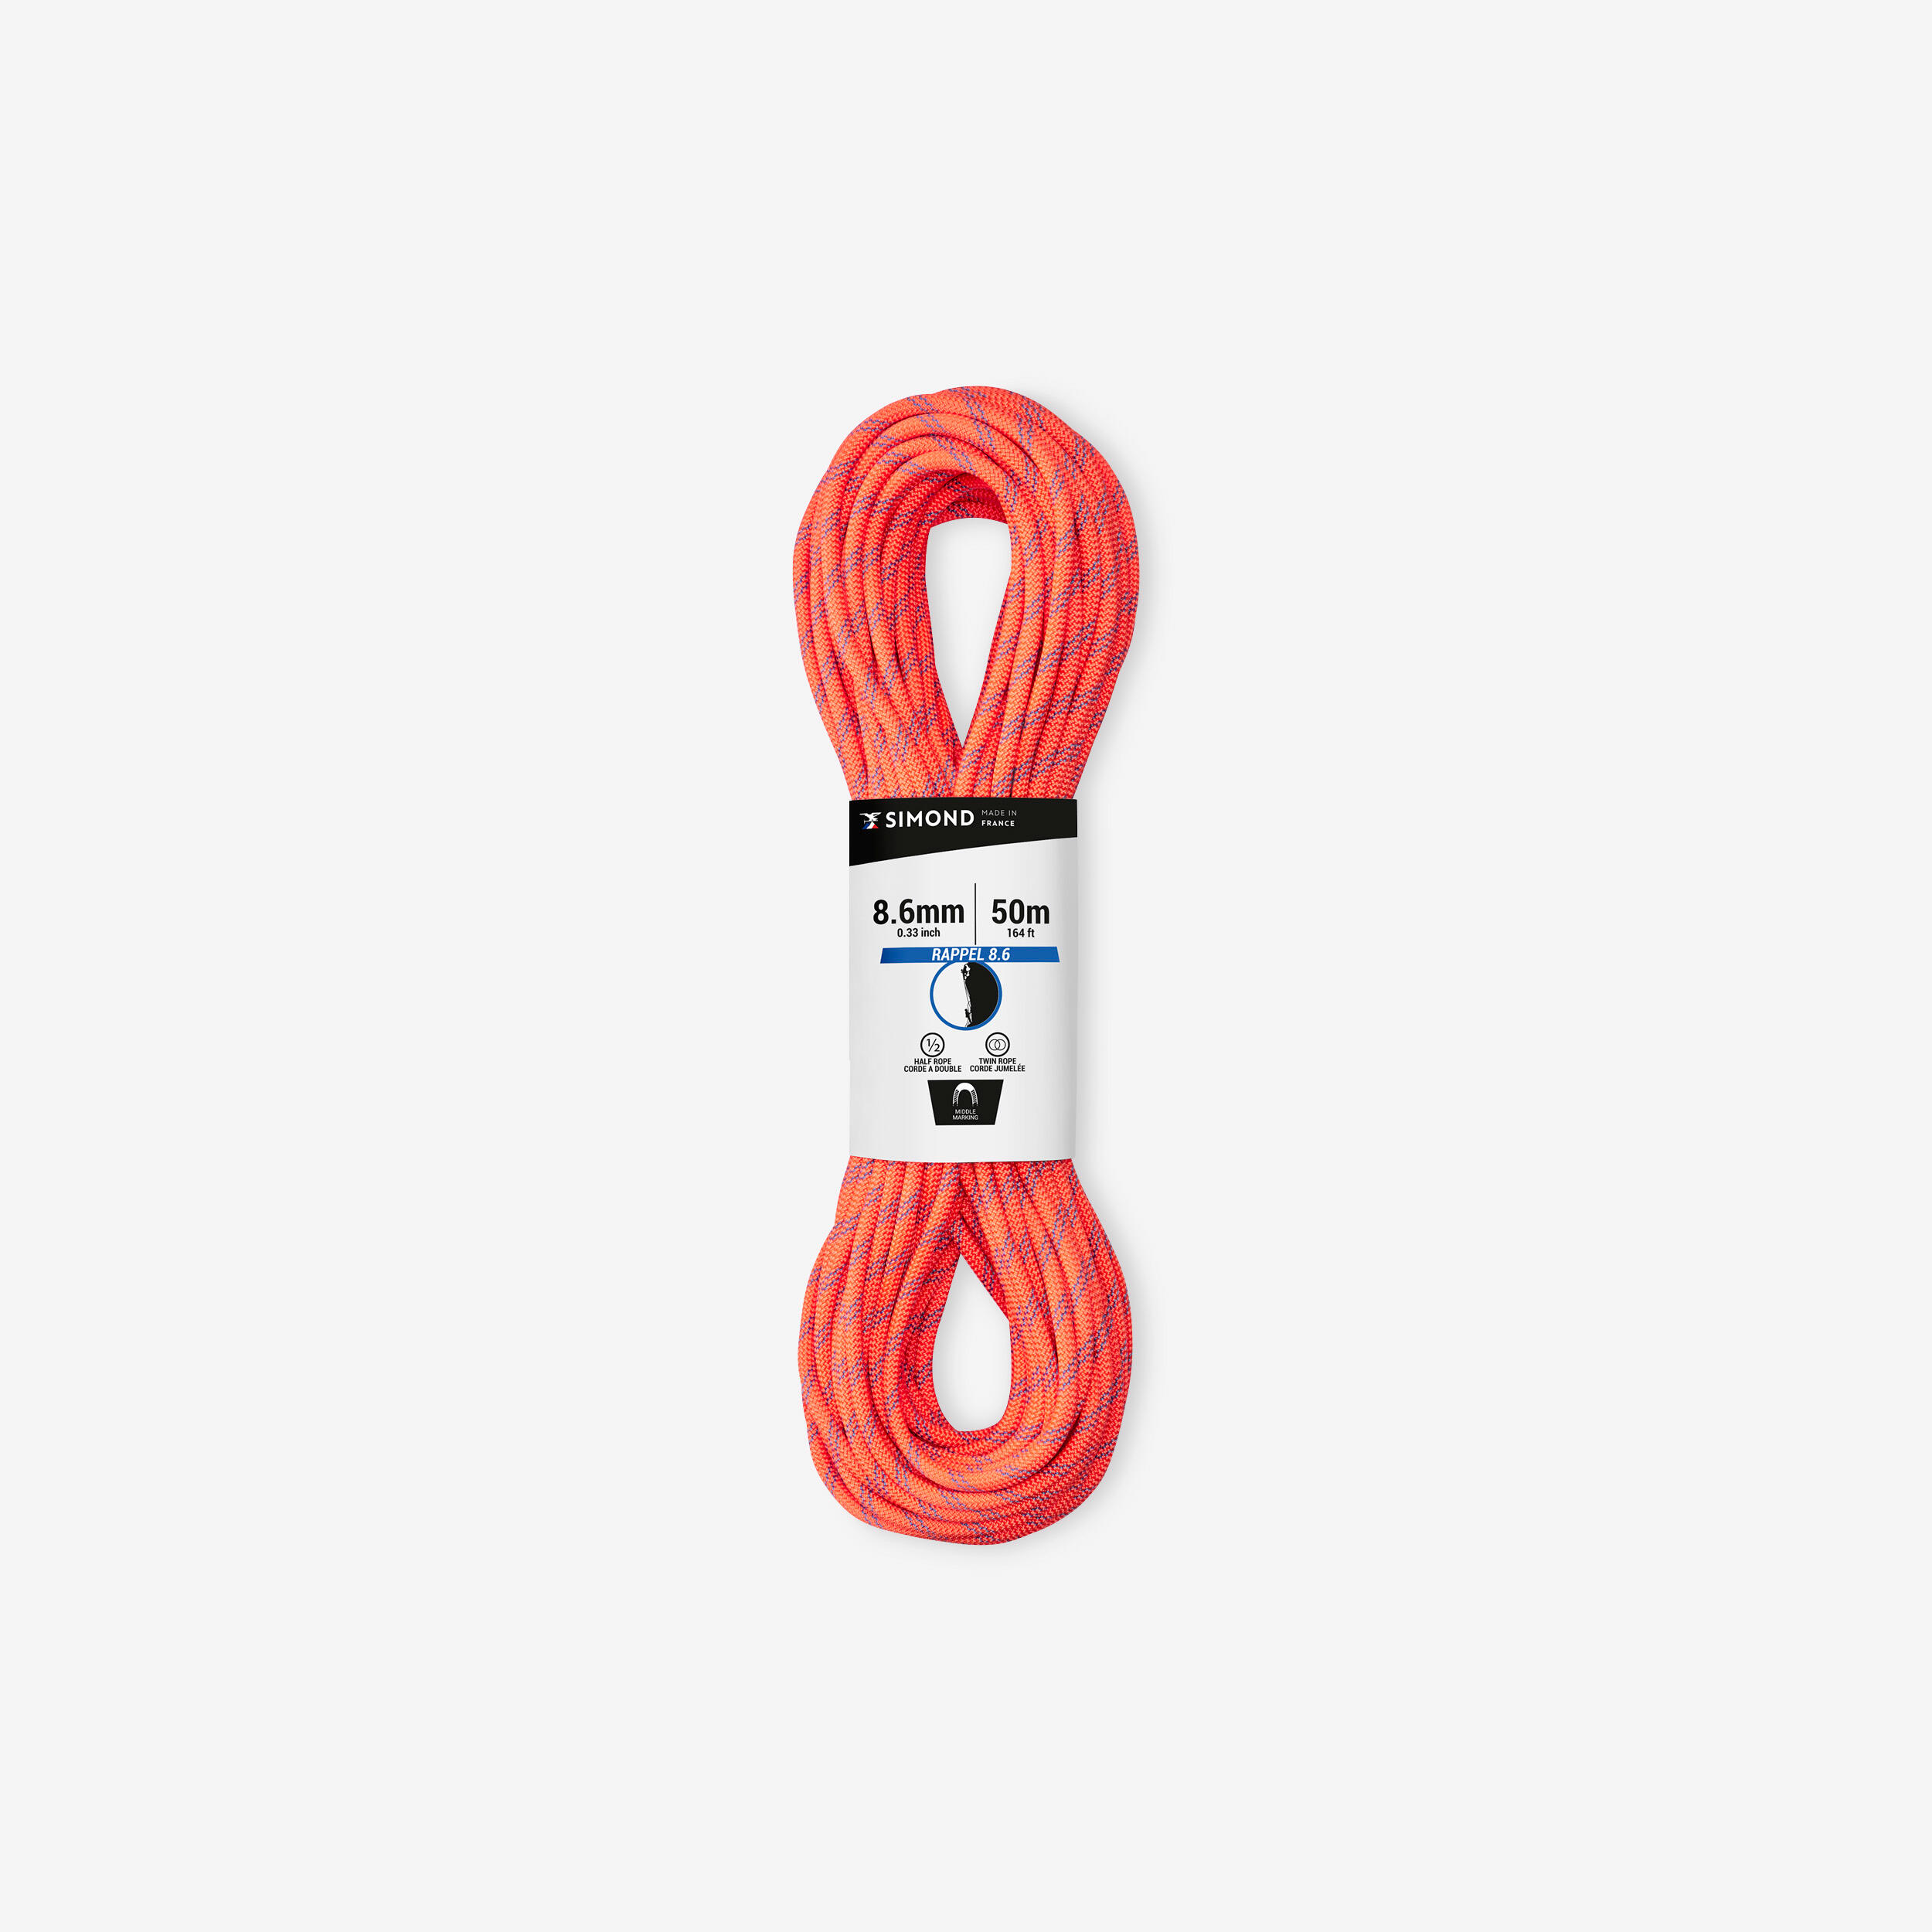 Climbing and mountaineering half rope 8.6 mm x 50 m - RAPPEL 8.6 orange 1/8